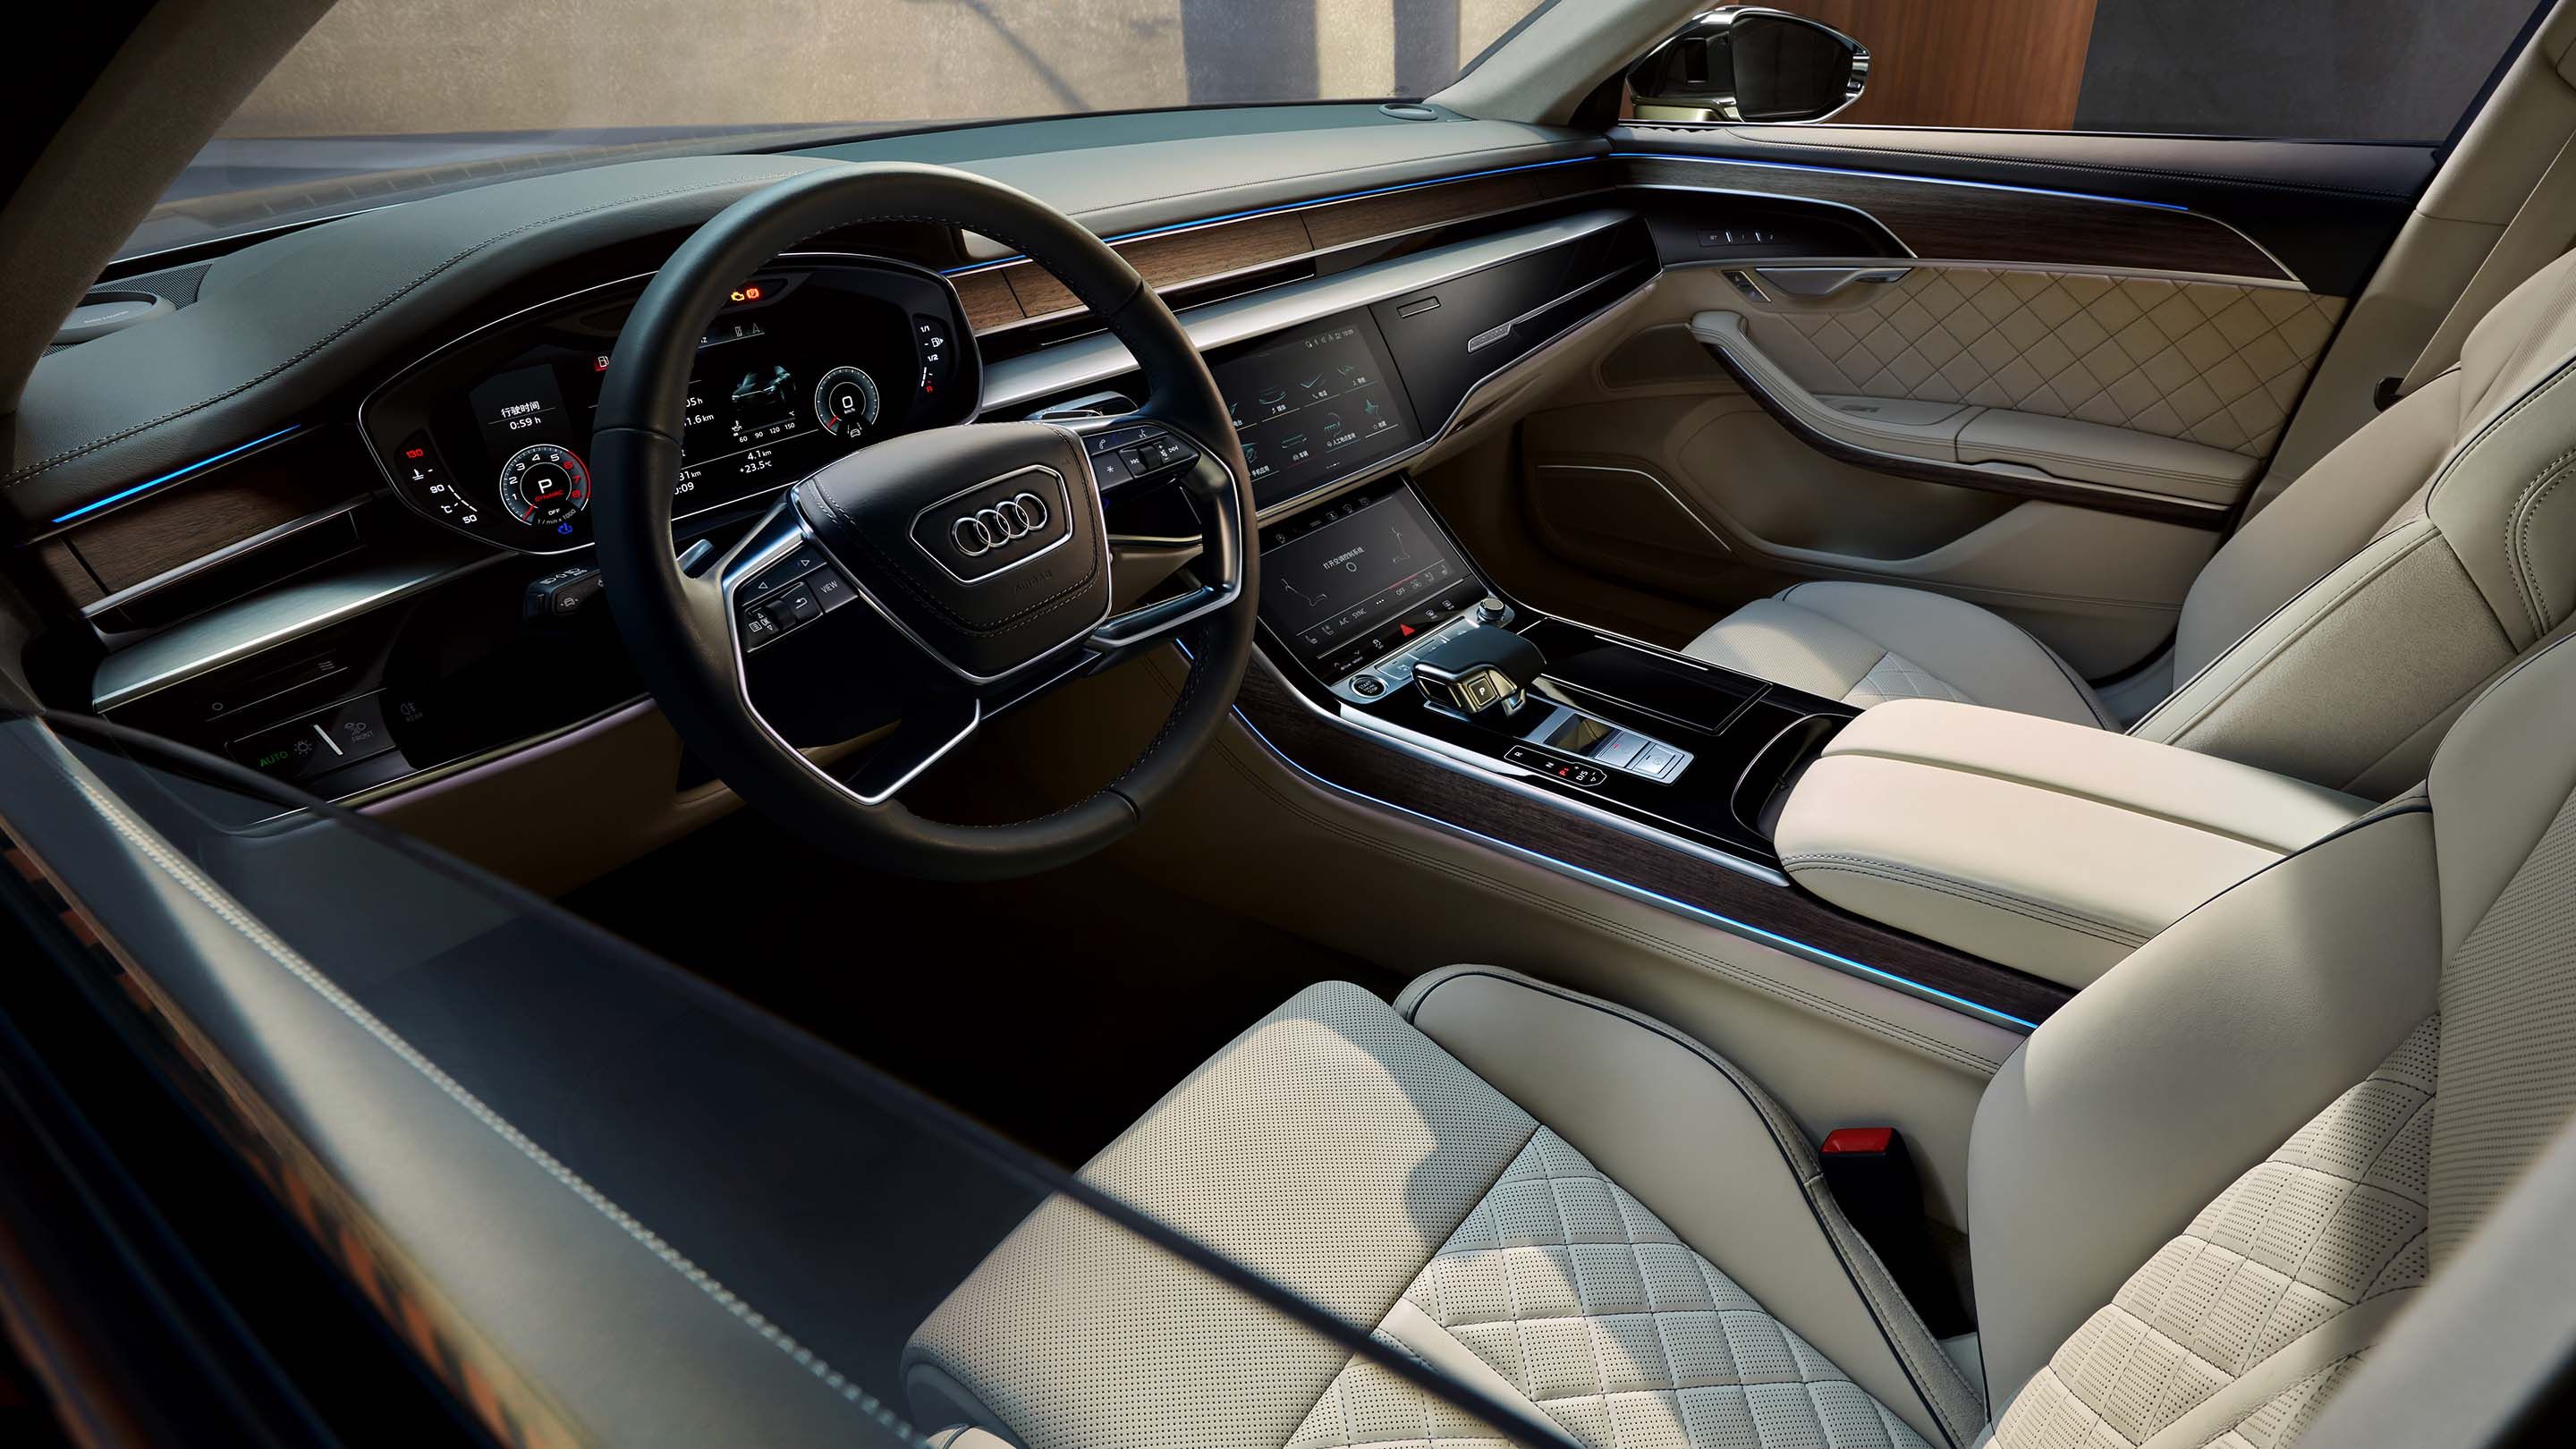 2022 Audi A8 L Horch dashboard layout view